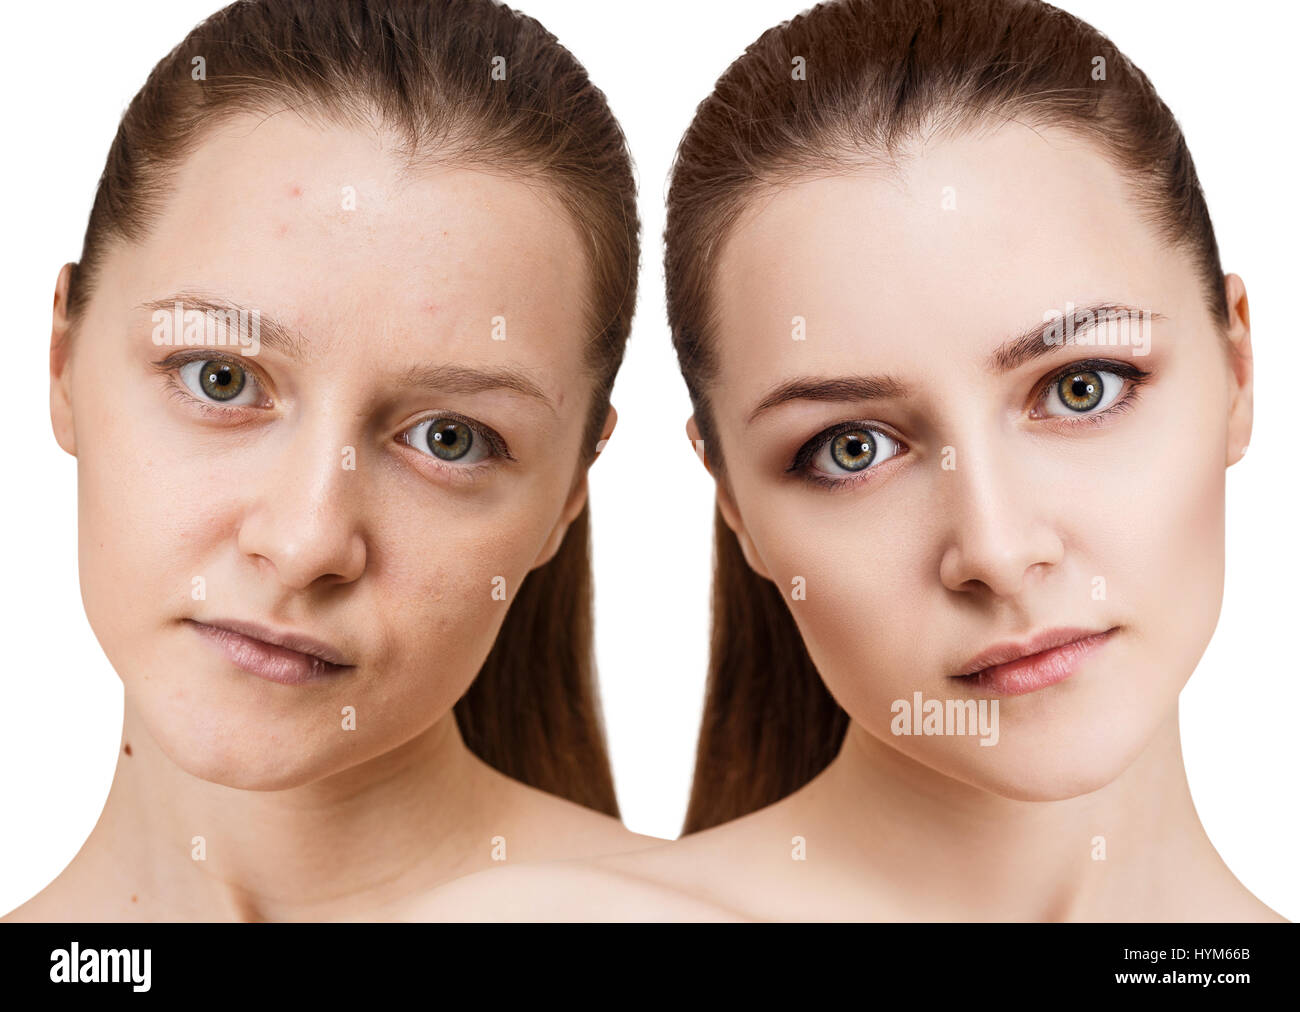 Young woman before and after makeup. Stock Photo